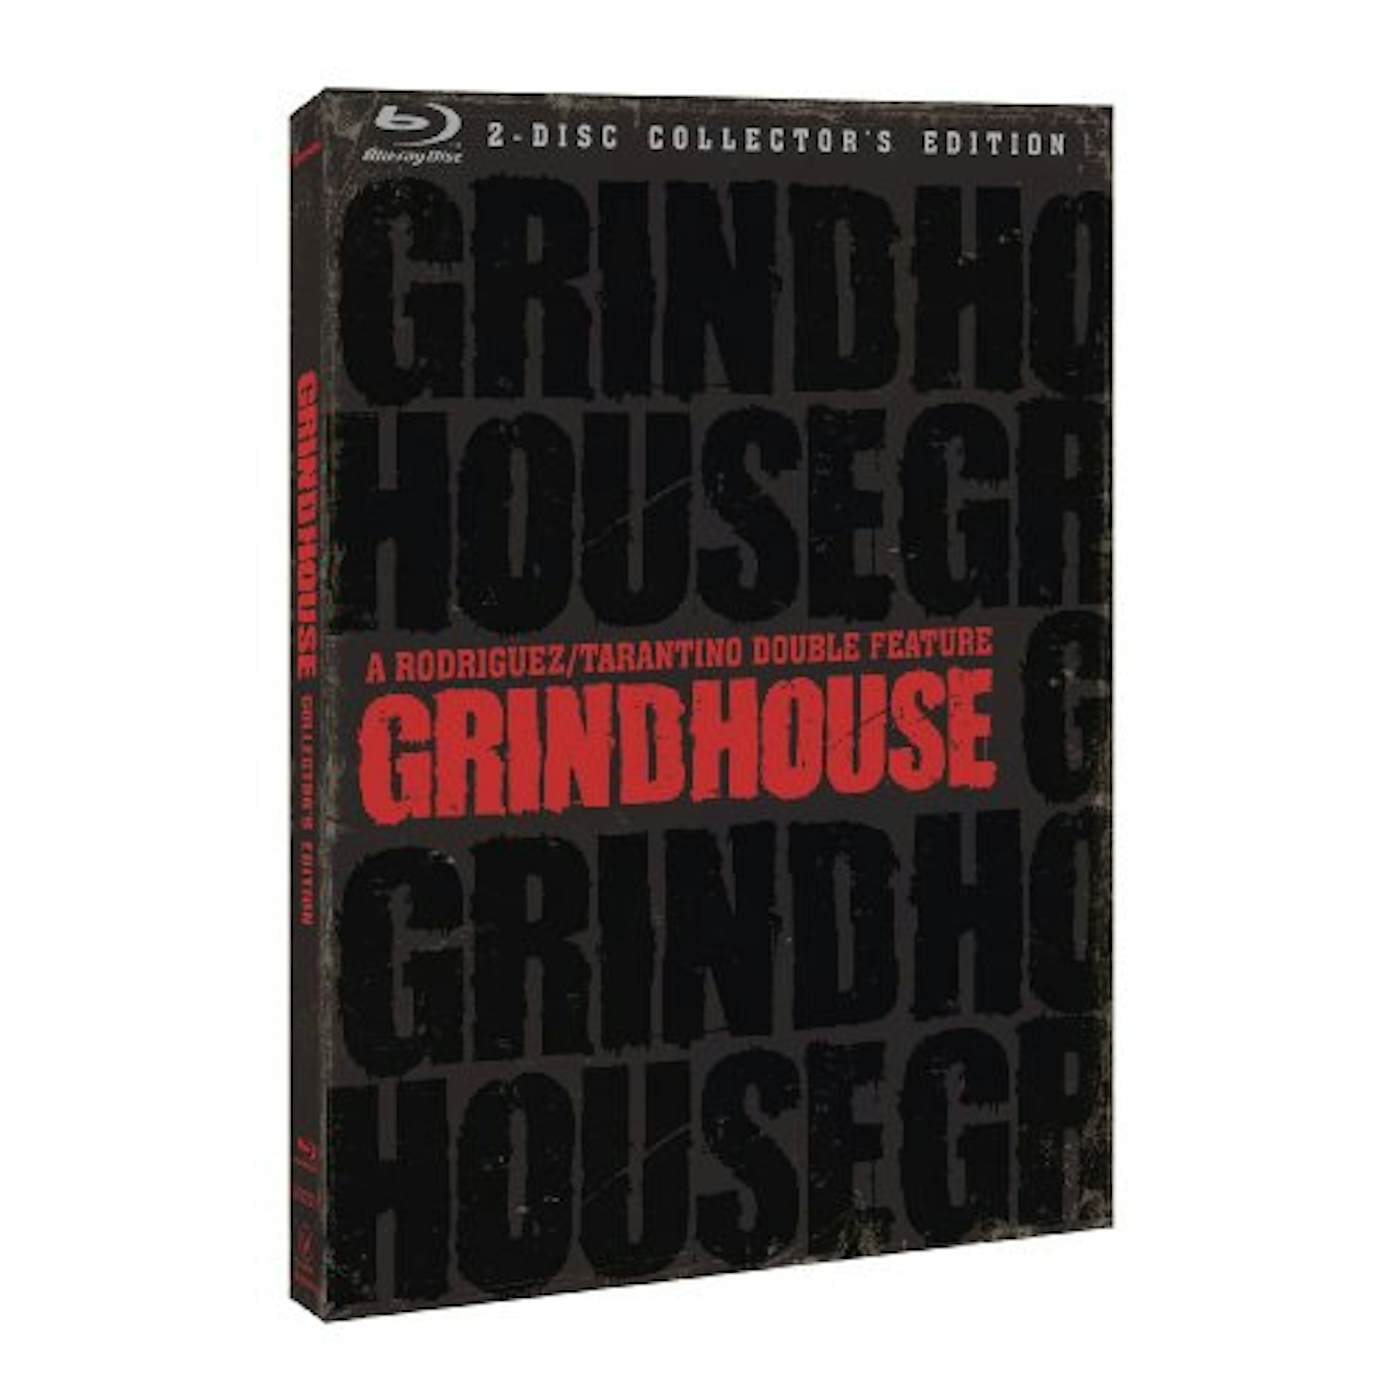 GRINDHOUSE Blu-ray